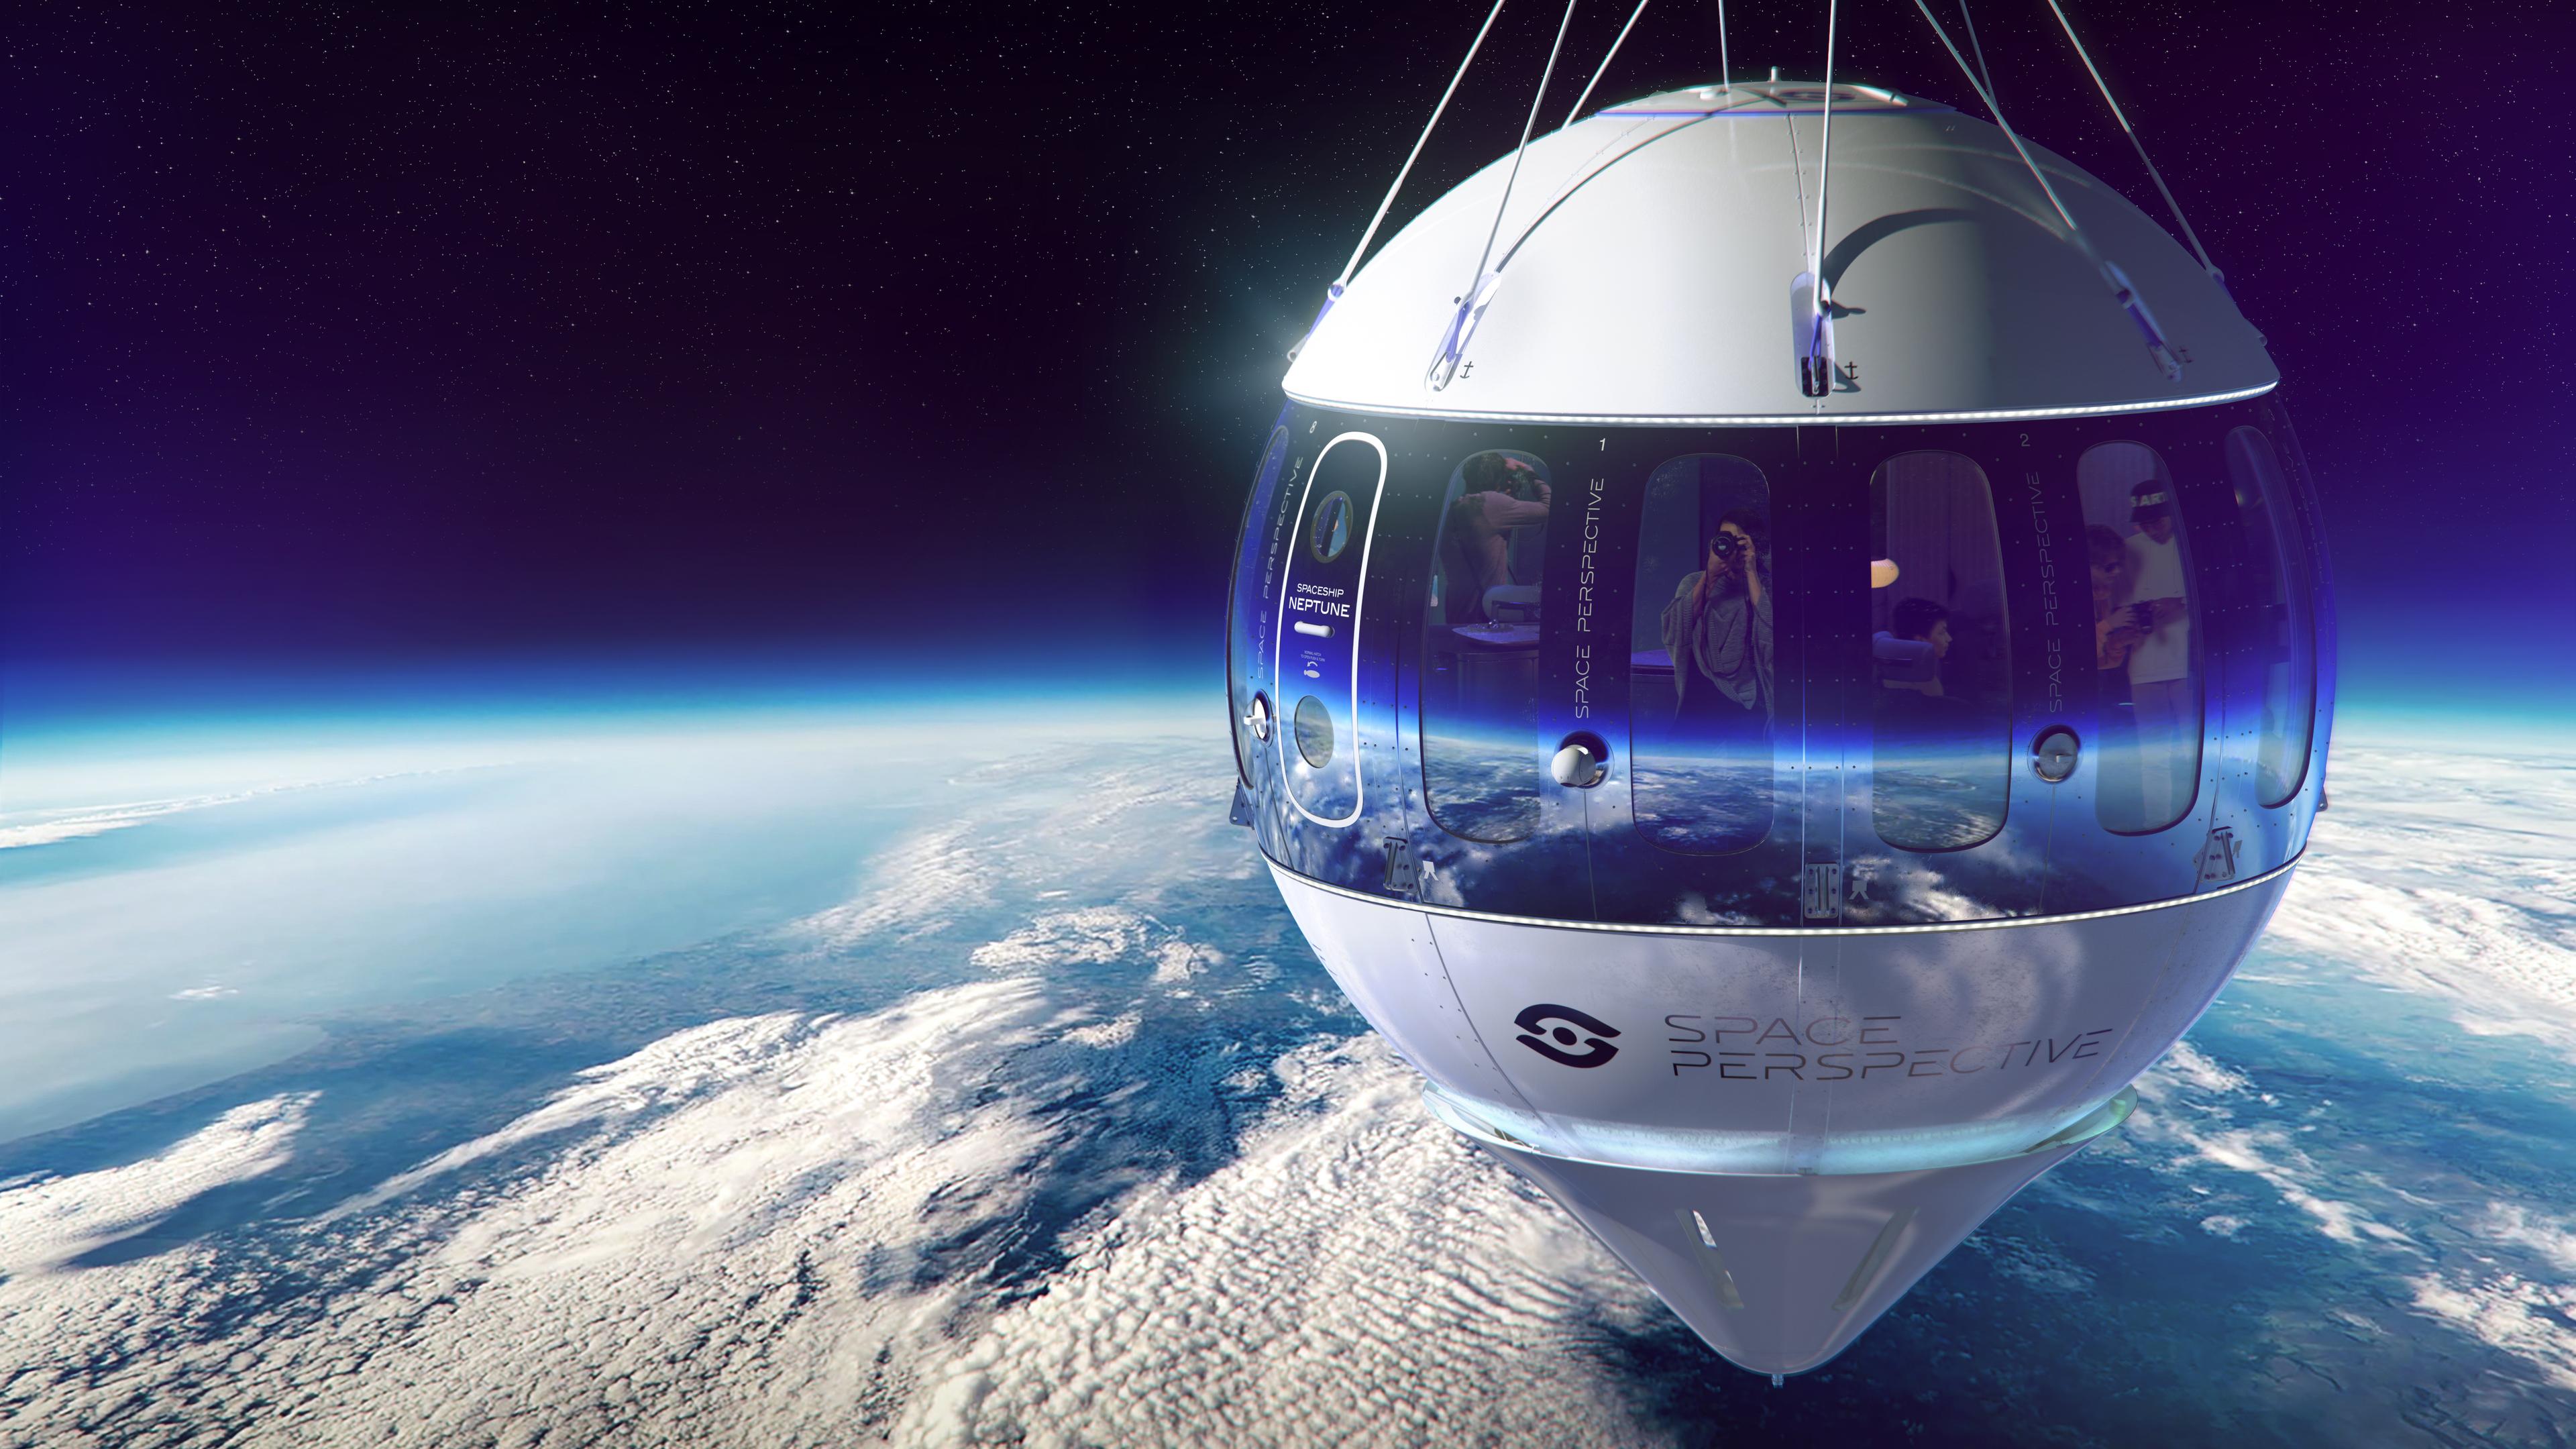 Press Release: Space Perspective Unveils Patented Capsule Design